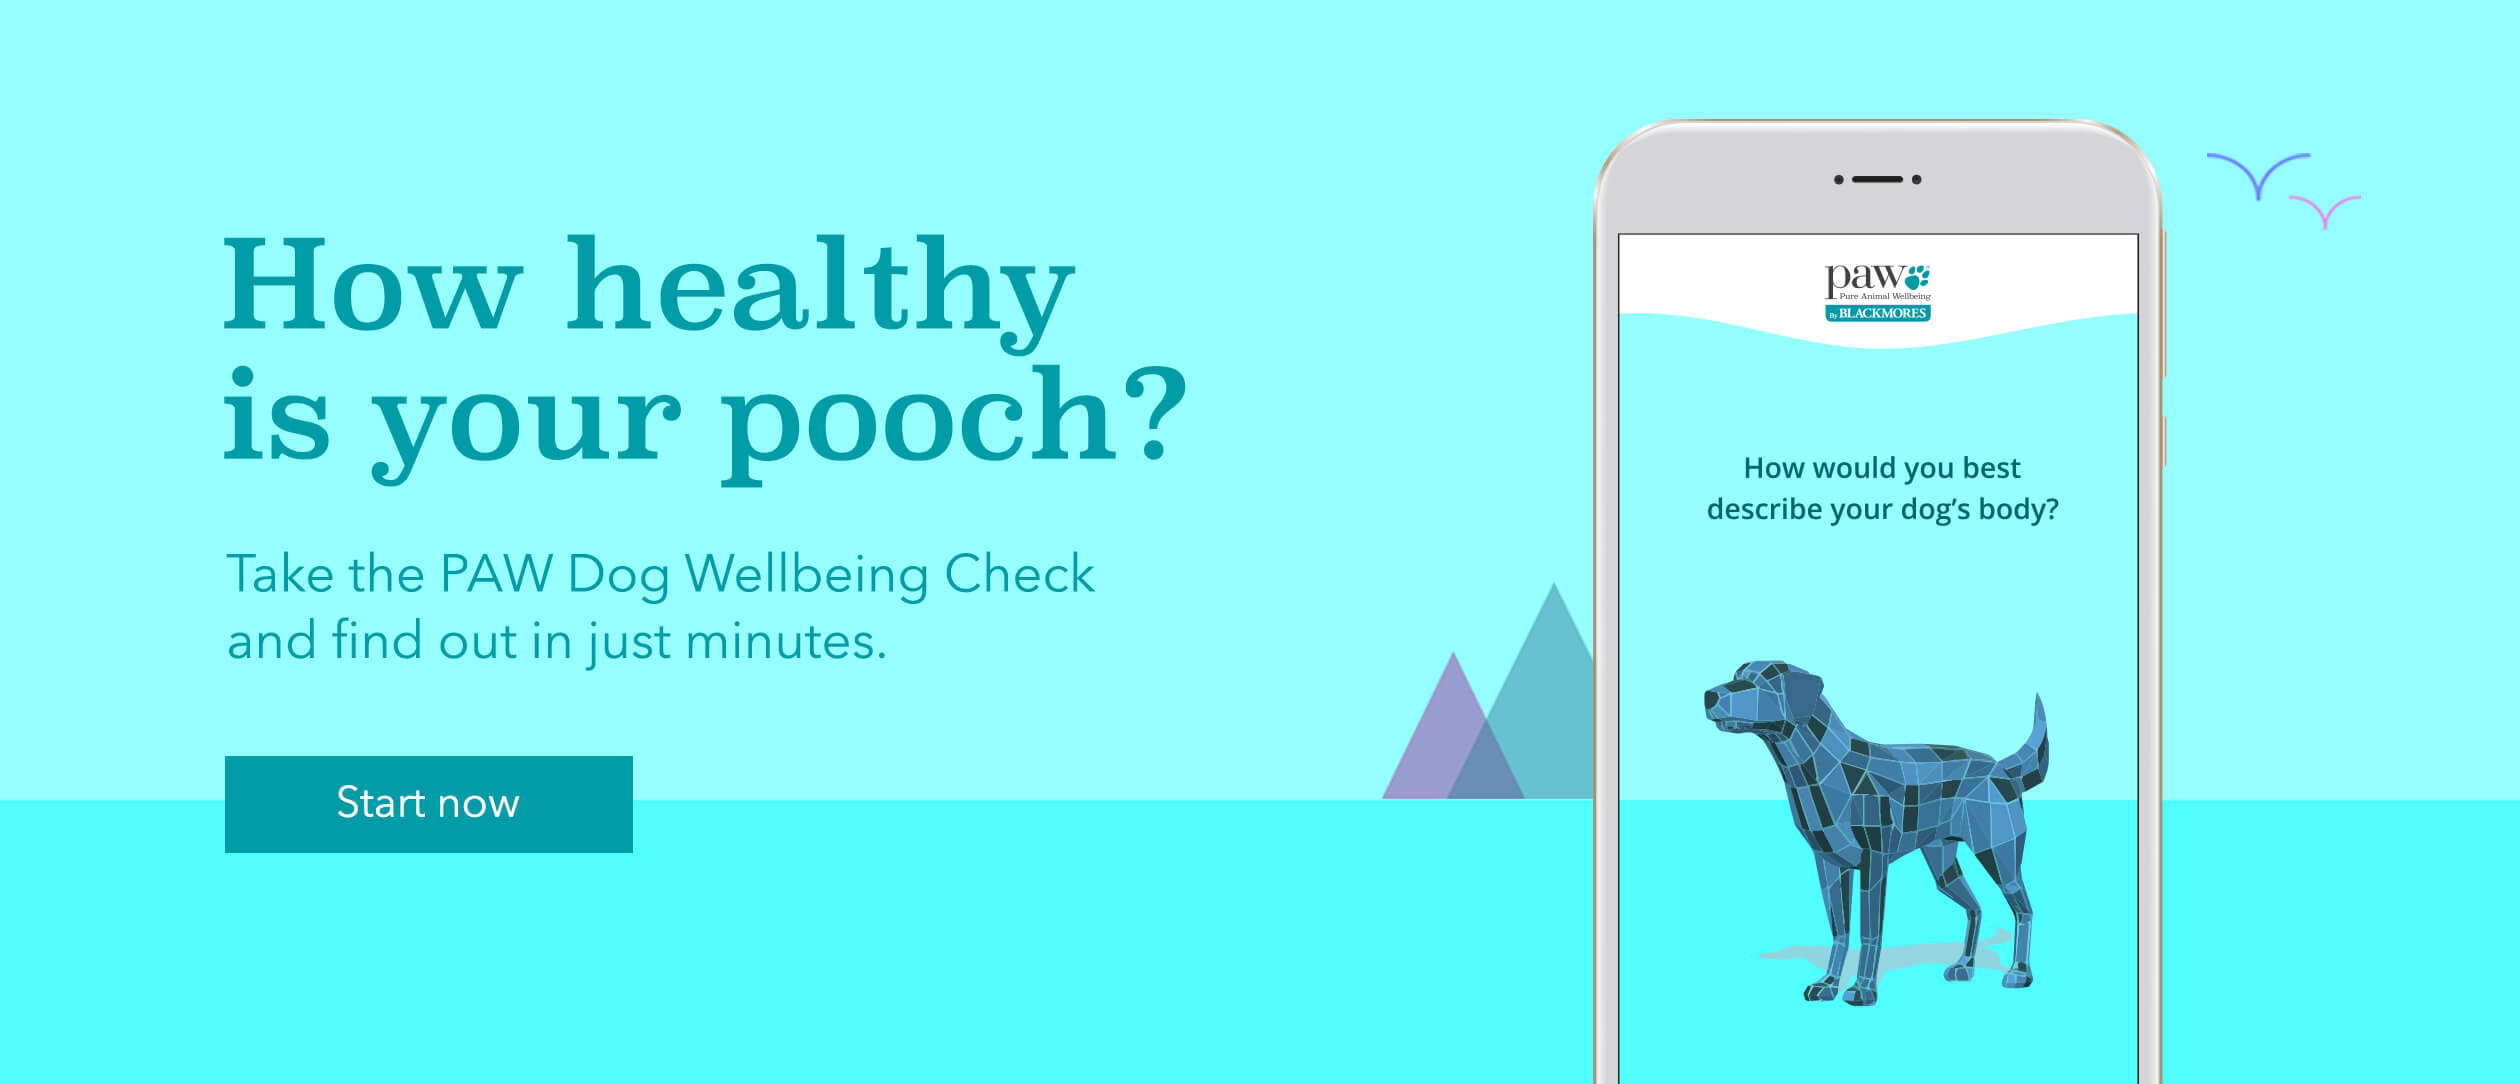 Take the Dog Wellbeing Check and test your dog's health in just 2 minutes. Take the survey now www.dogwellbeingcheck.com.au